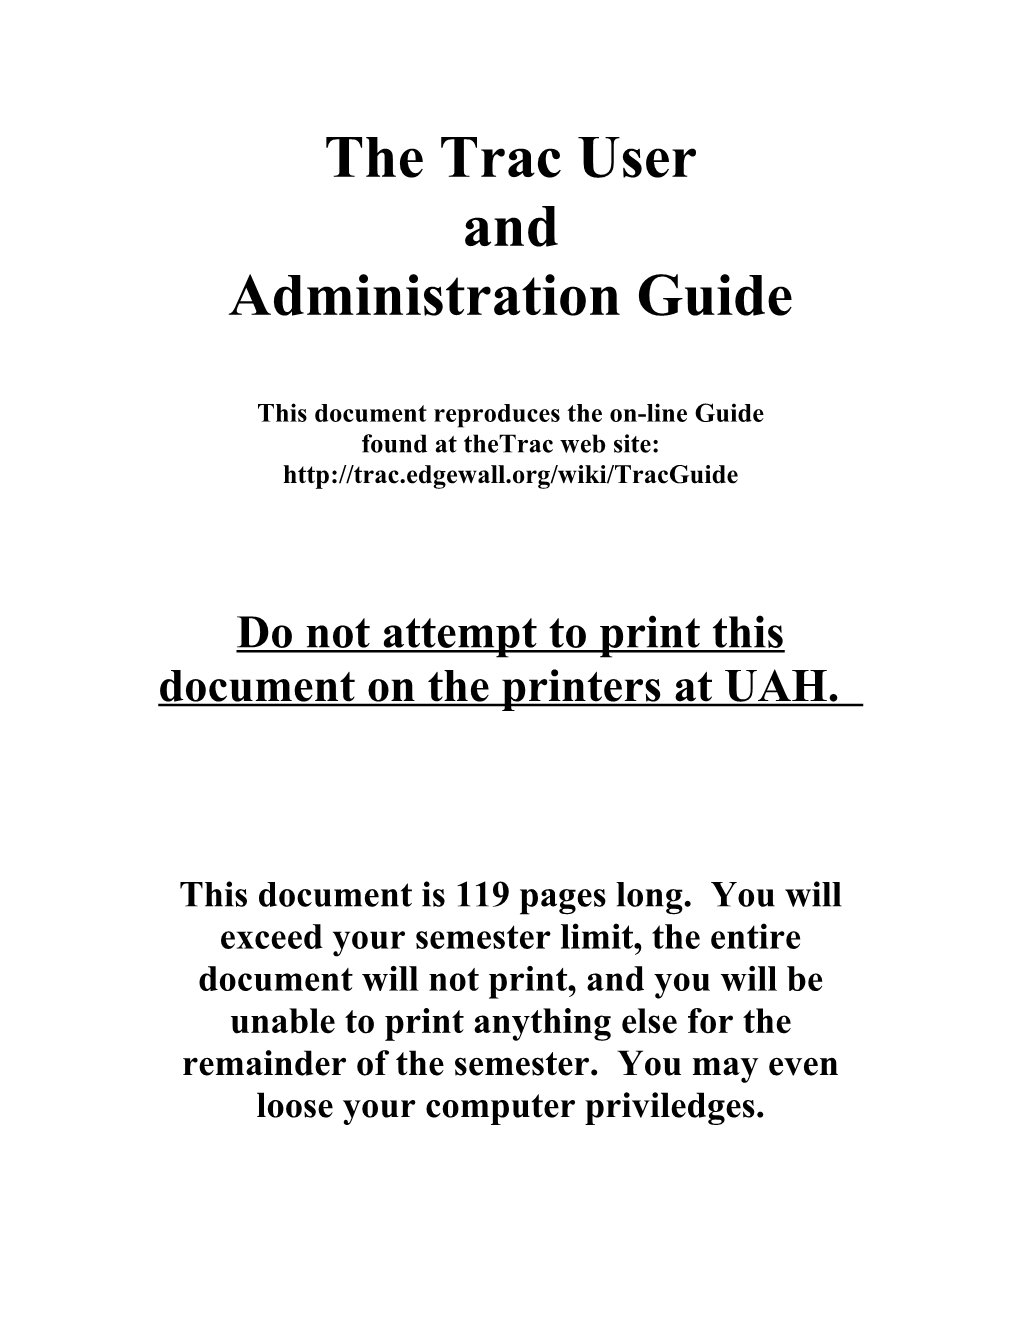 The Trac User and Administration Guide